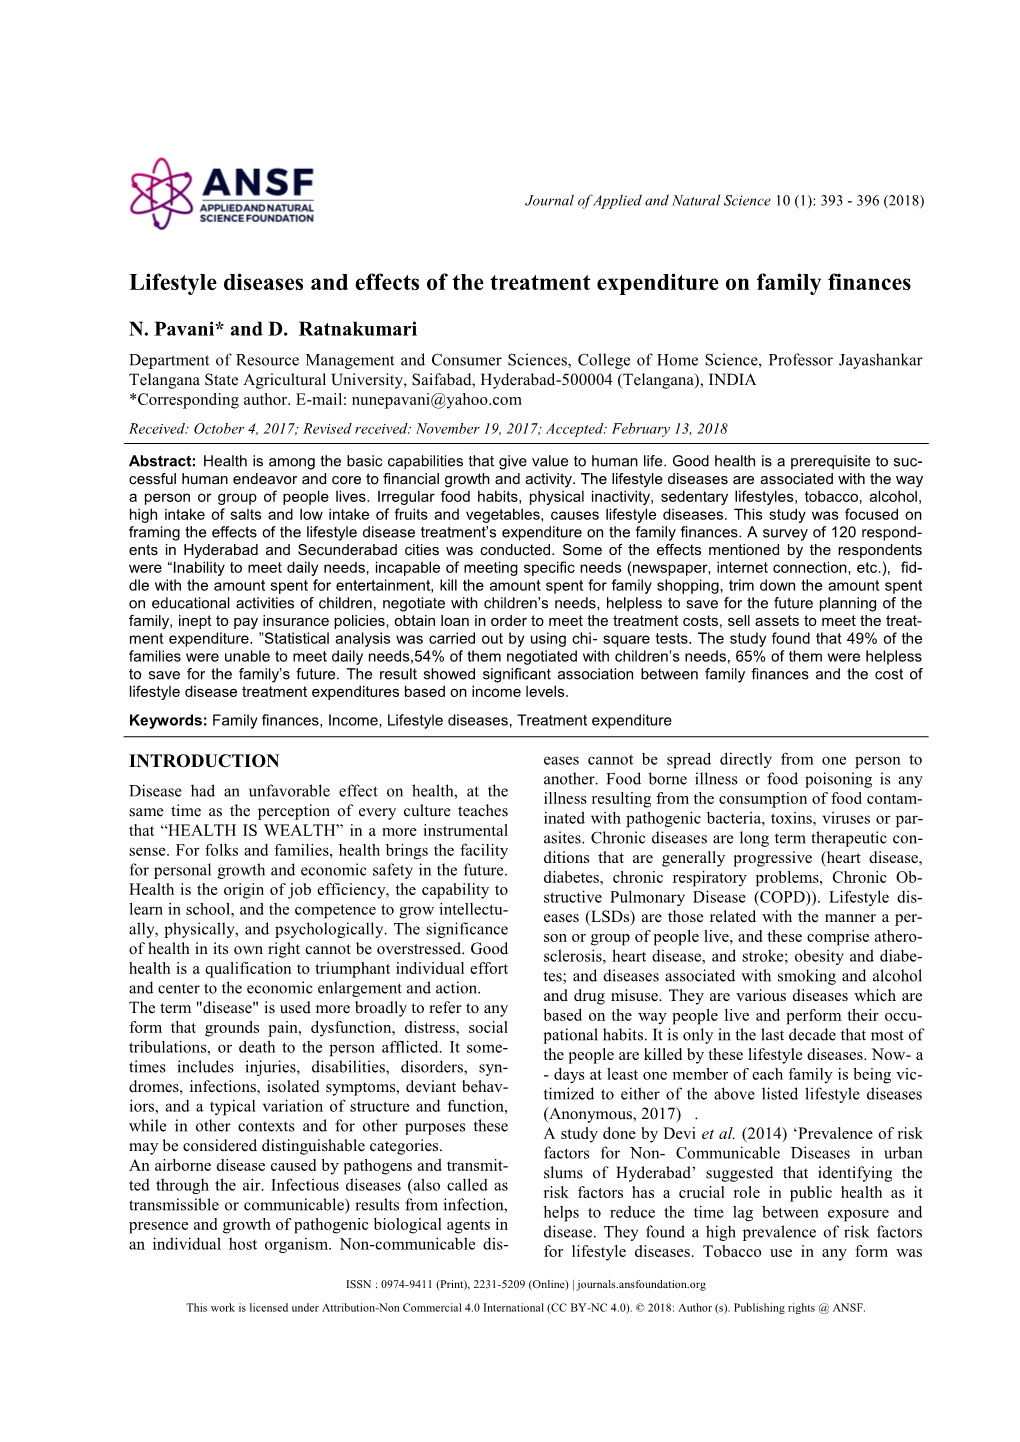 Lifestyle Diseases and Effects of the Treatment Expenditure on Family Finances